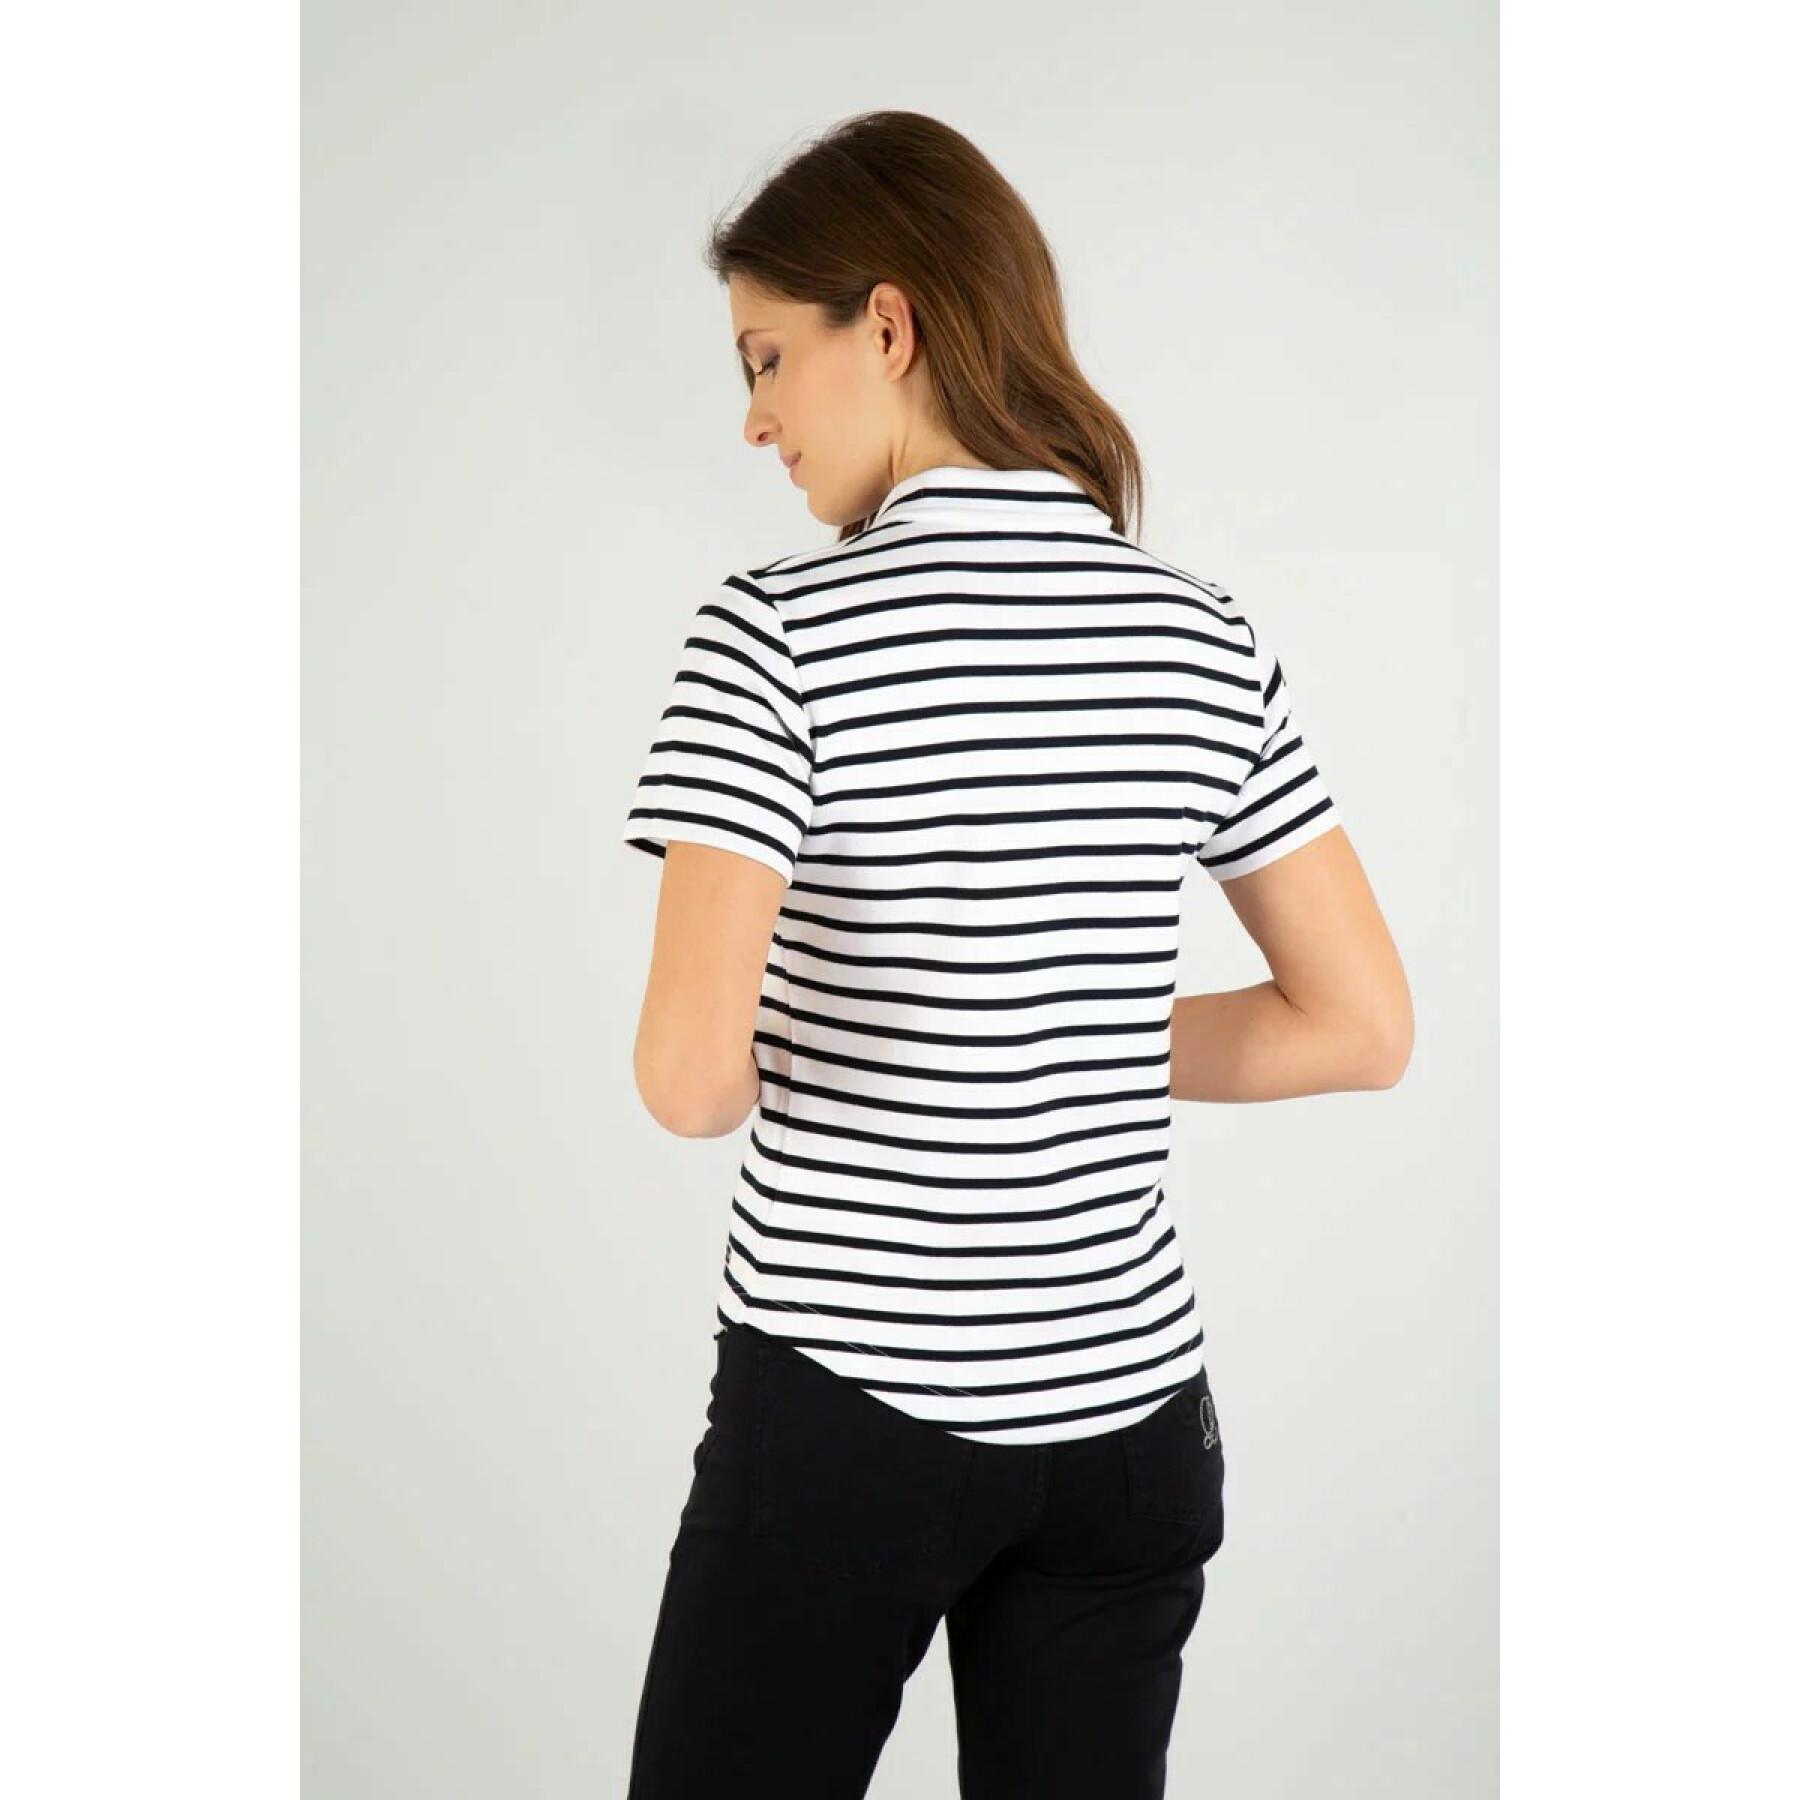 Women's polo shirt Armor-Lux quille